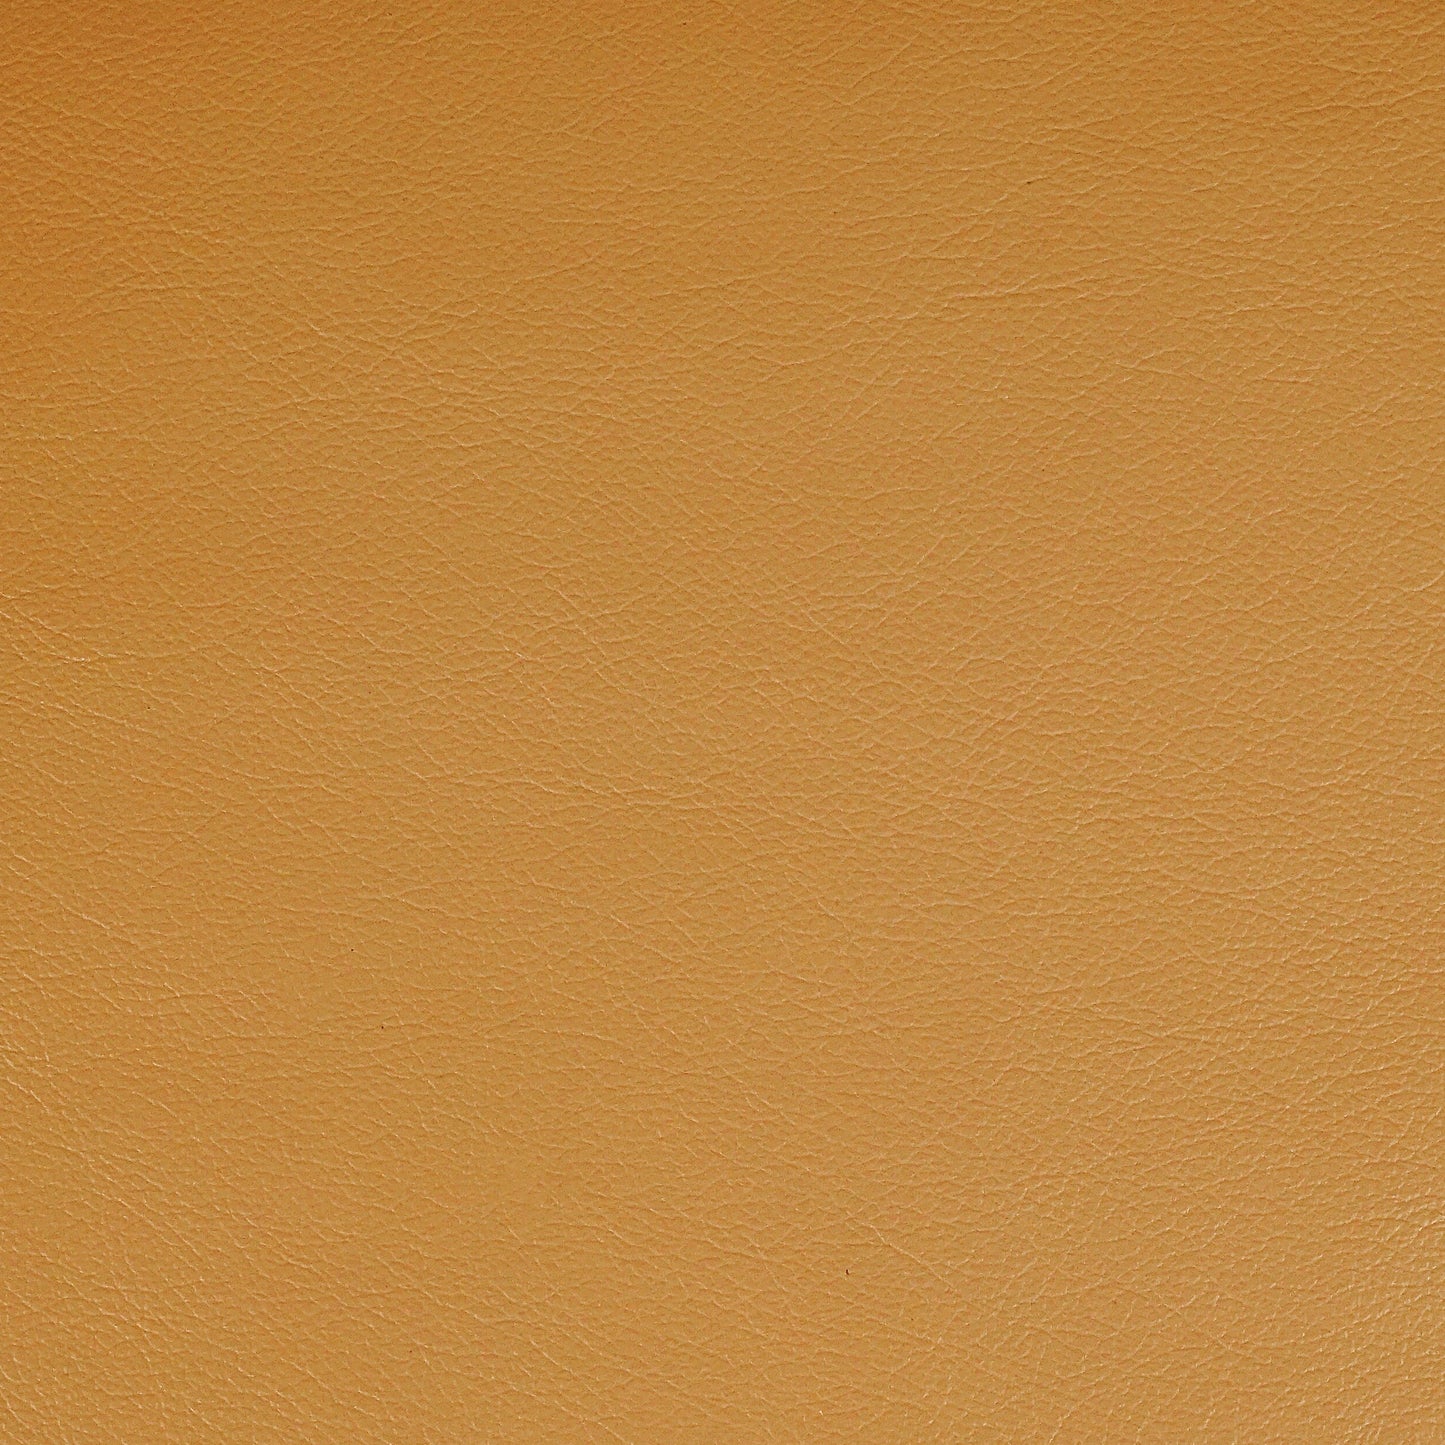 Kismet, Bishop, Iconic® Antimicrobial & Cleanable, Hospitality Leather Hide